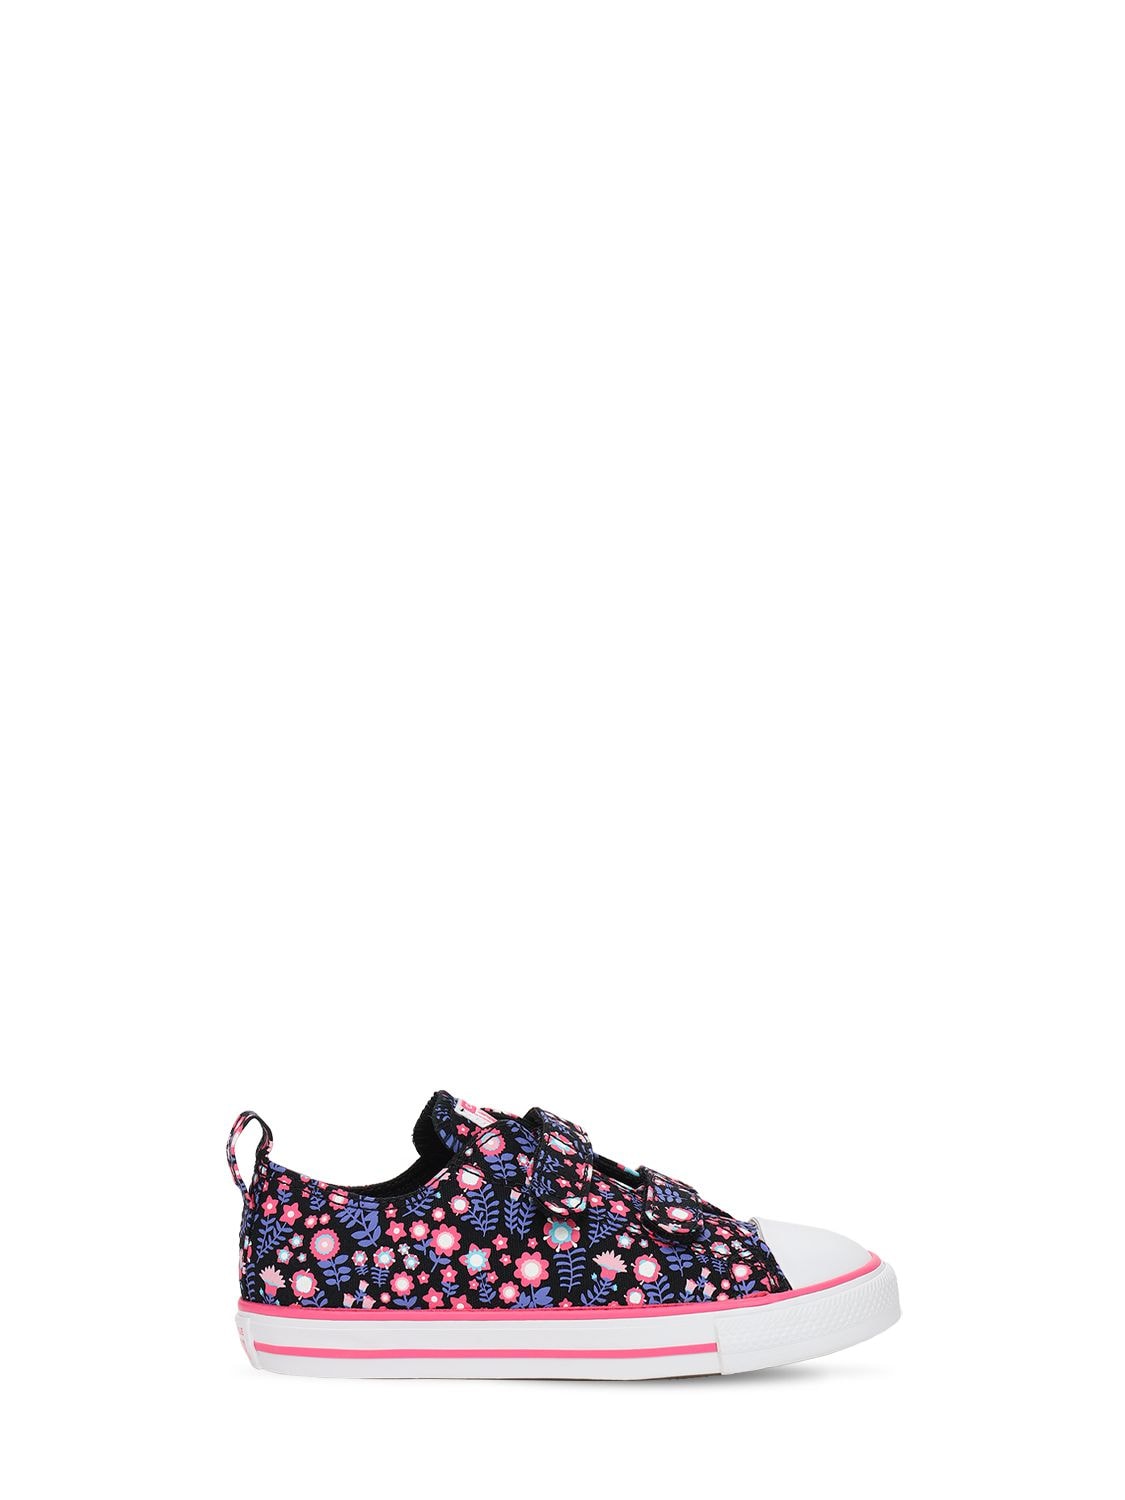 Image of Flower Print Chuck Taylor Sneakers